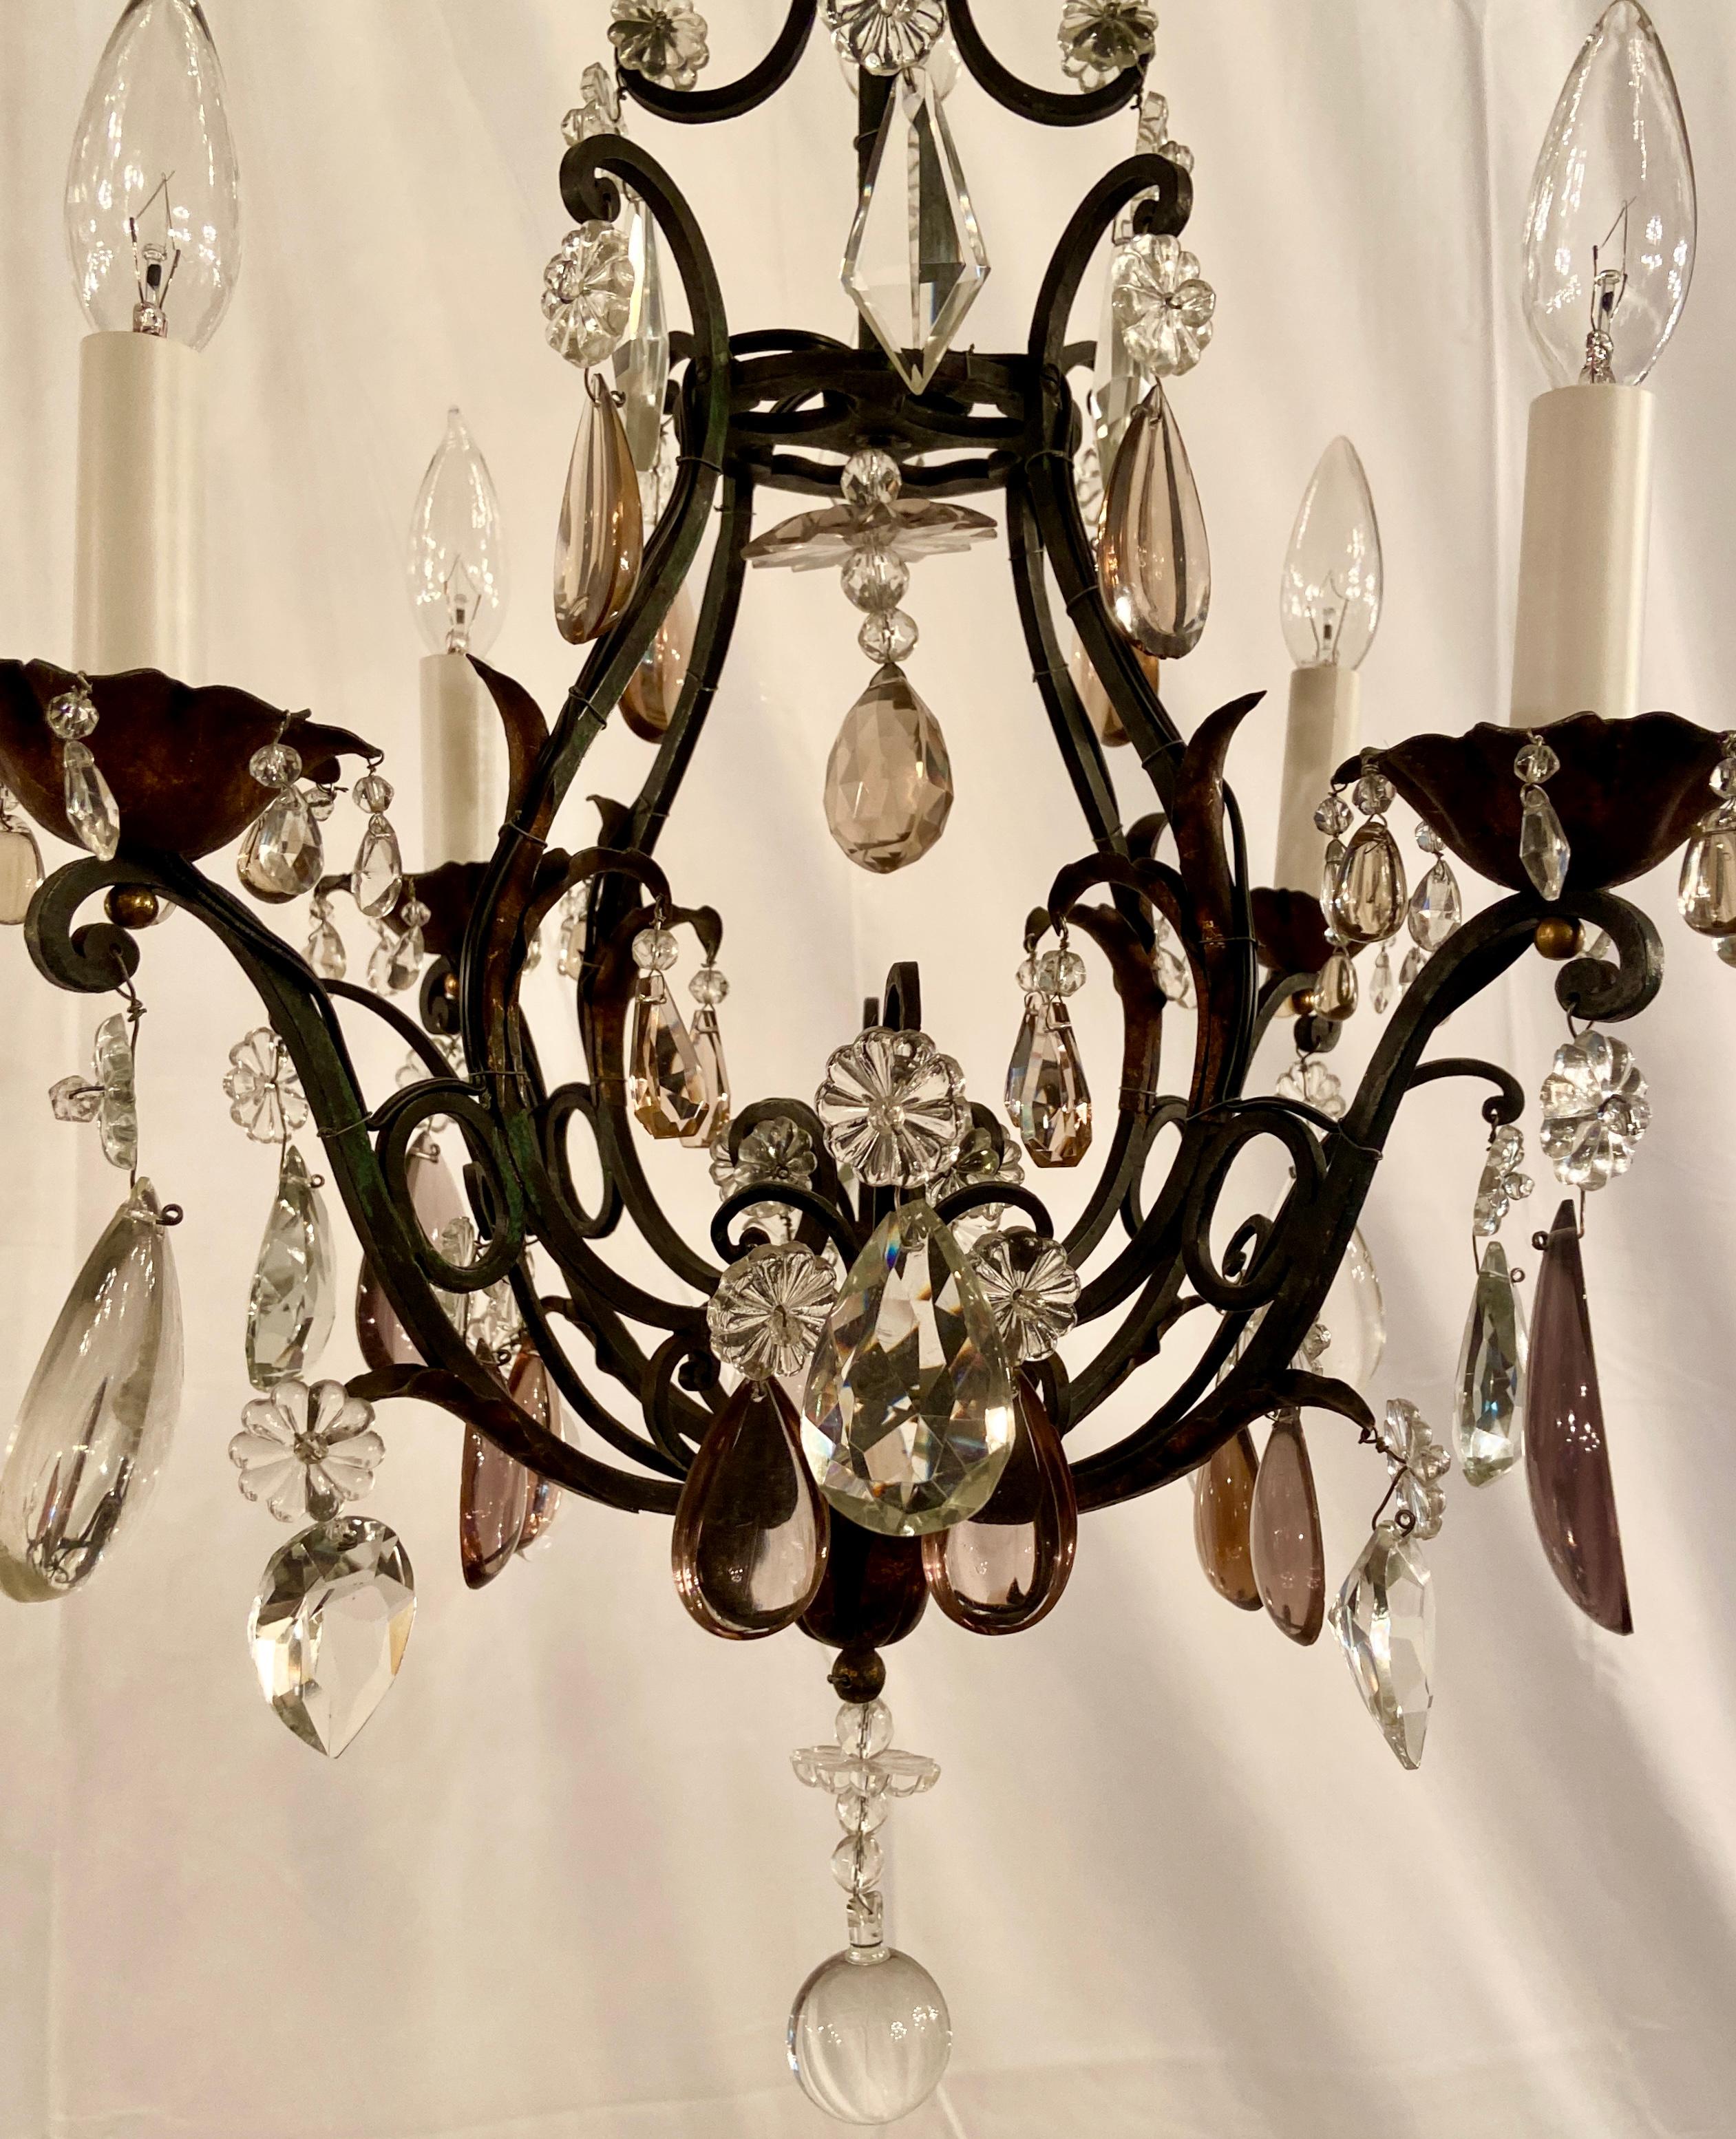 Small antique French multi-colored and clear crystal wrought iron chandelier, Circa 1910-1920.